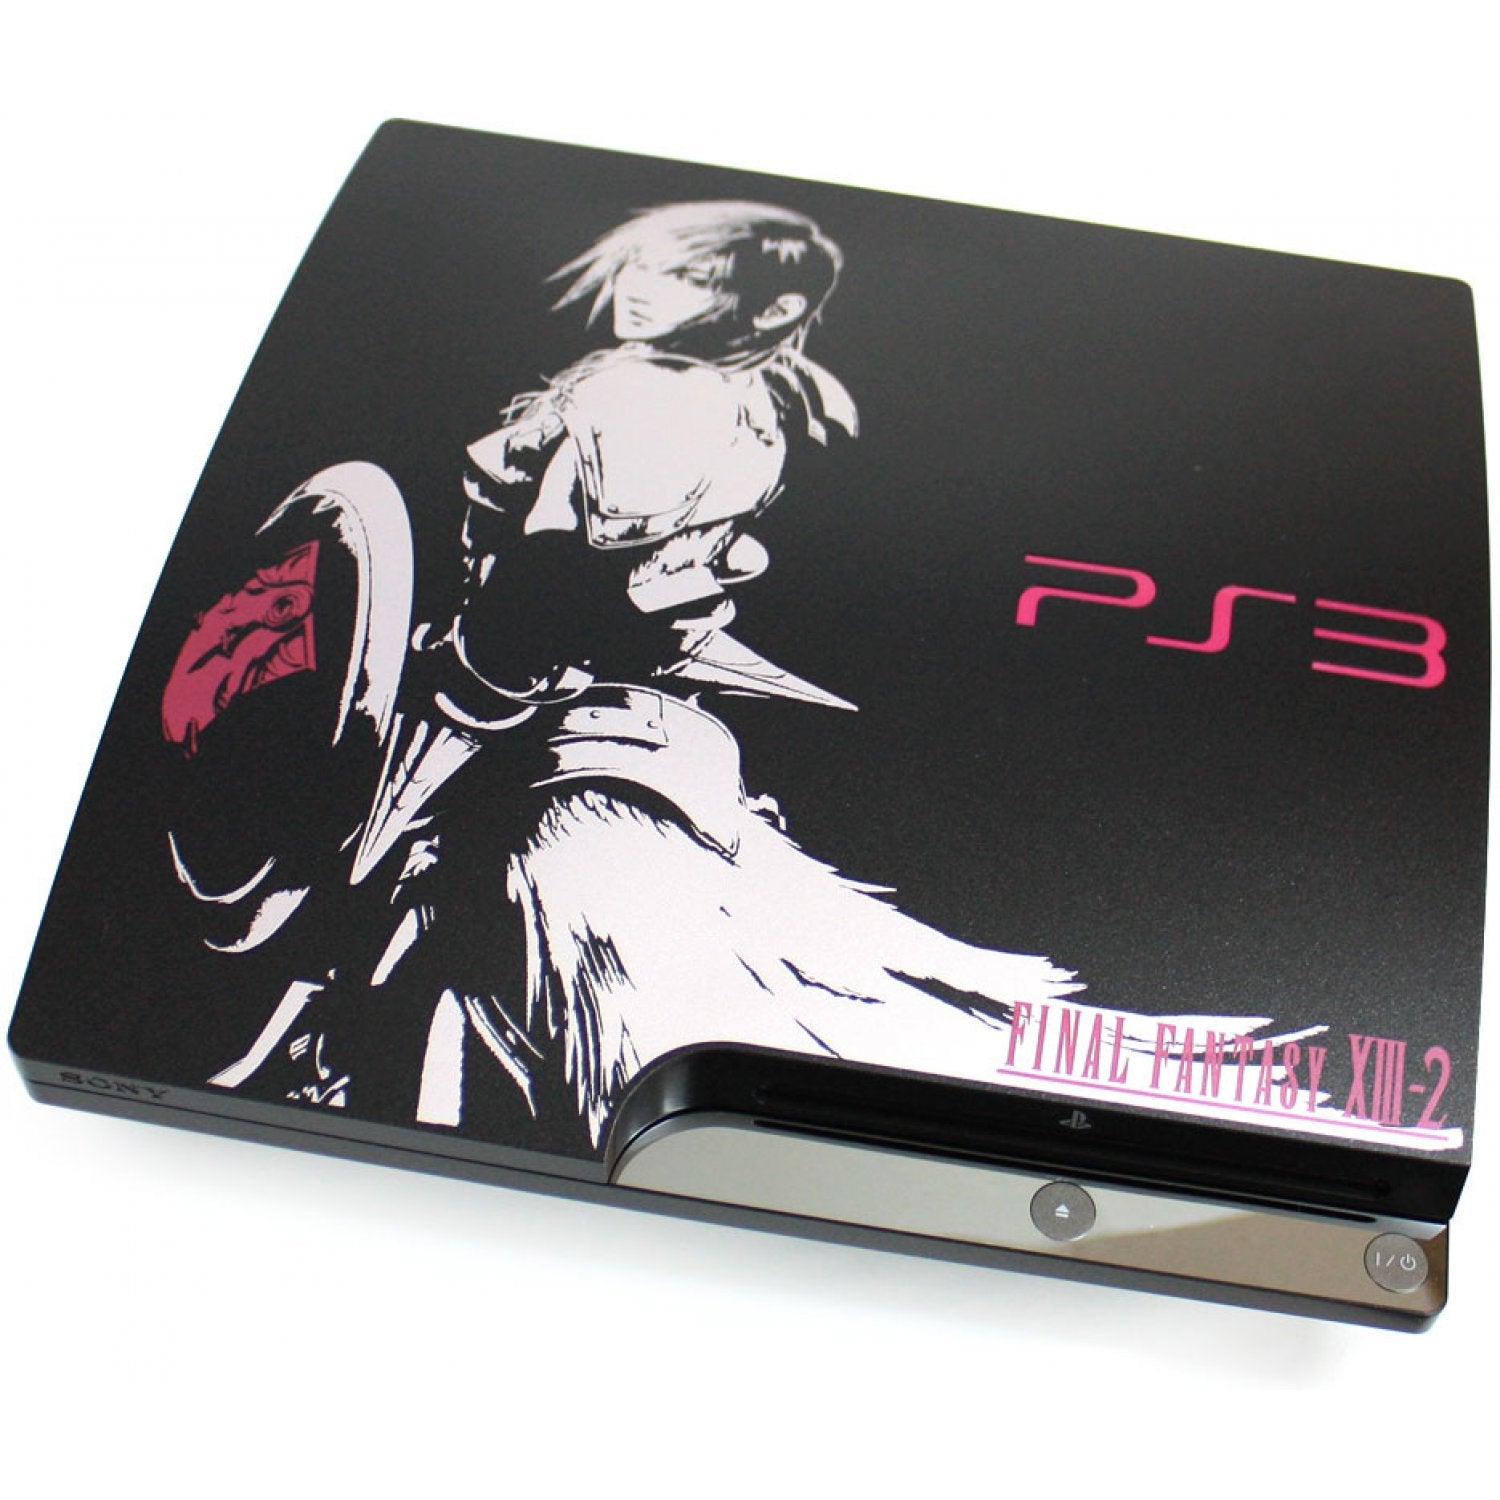 ps3 special edition consoles